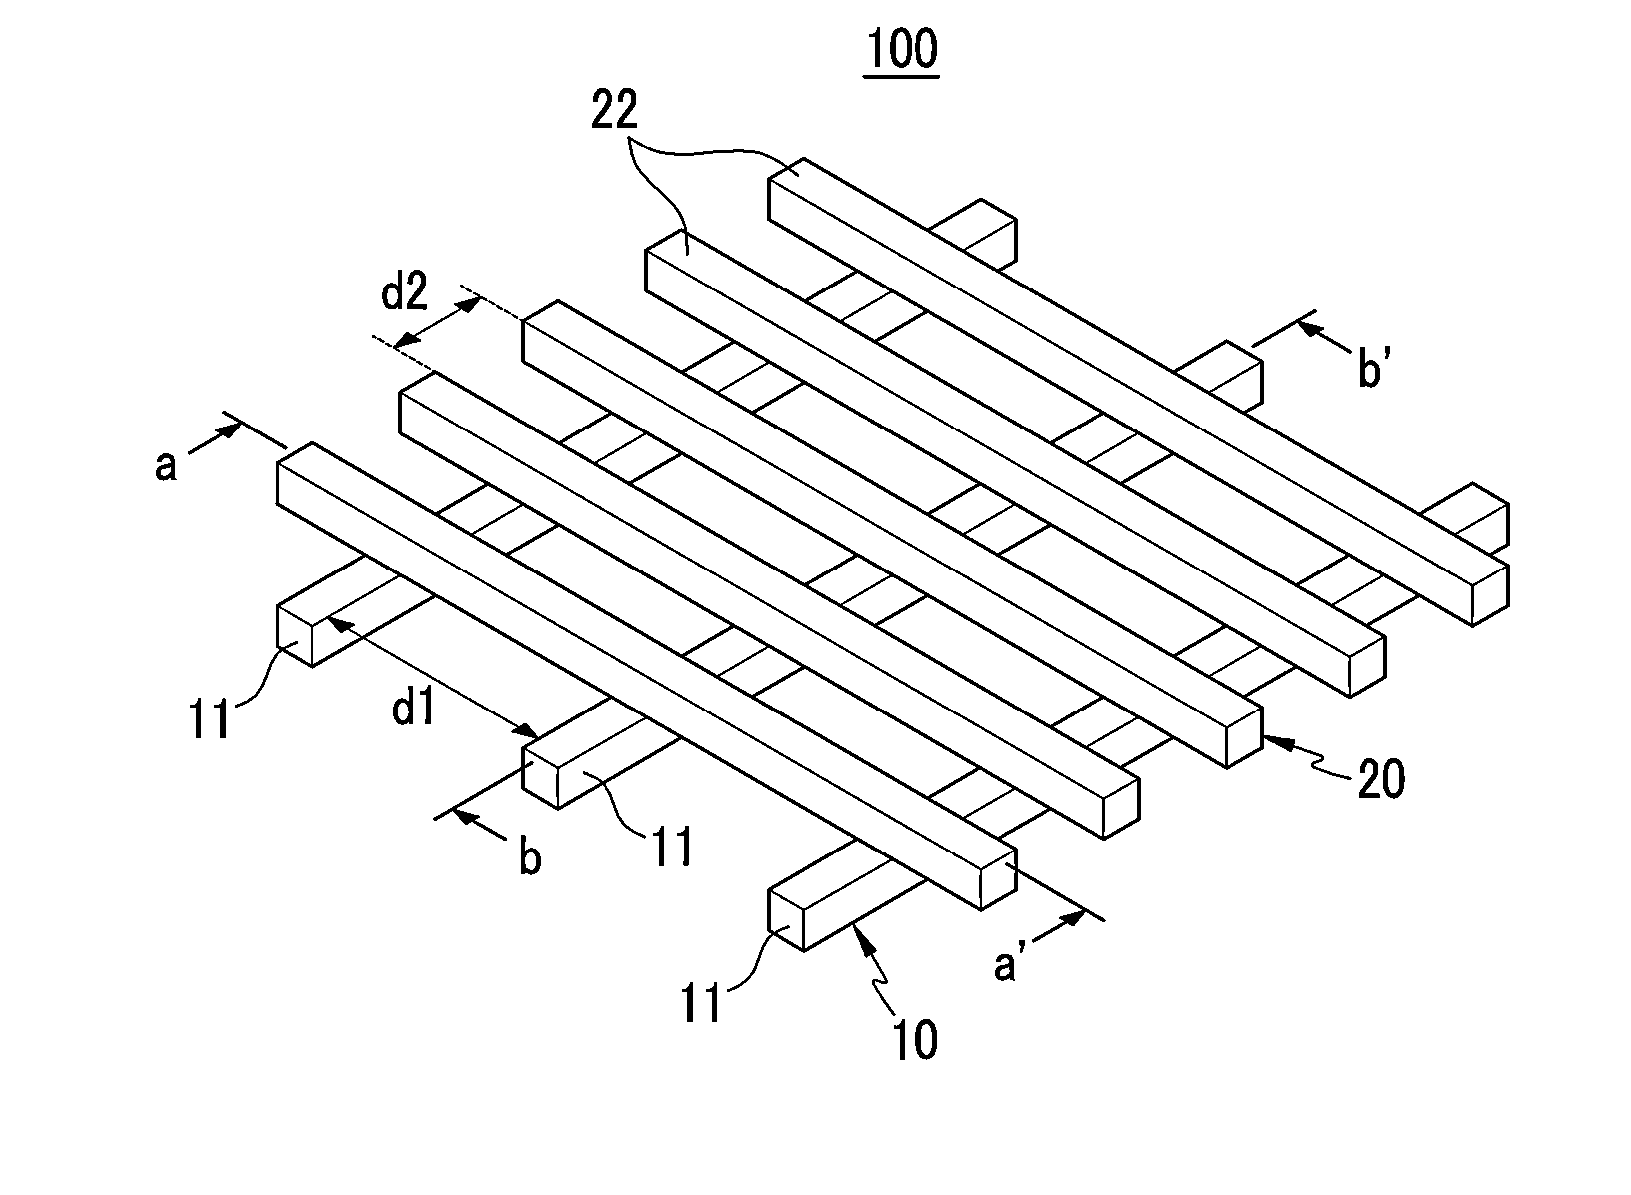 Membrane-type artificial scaffold and method for fabricating same